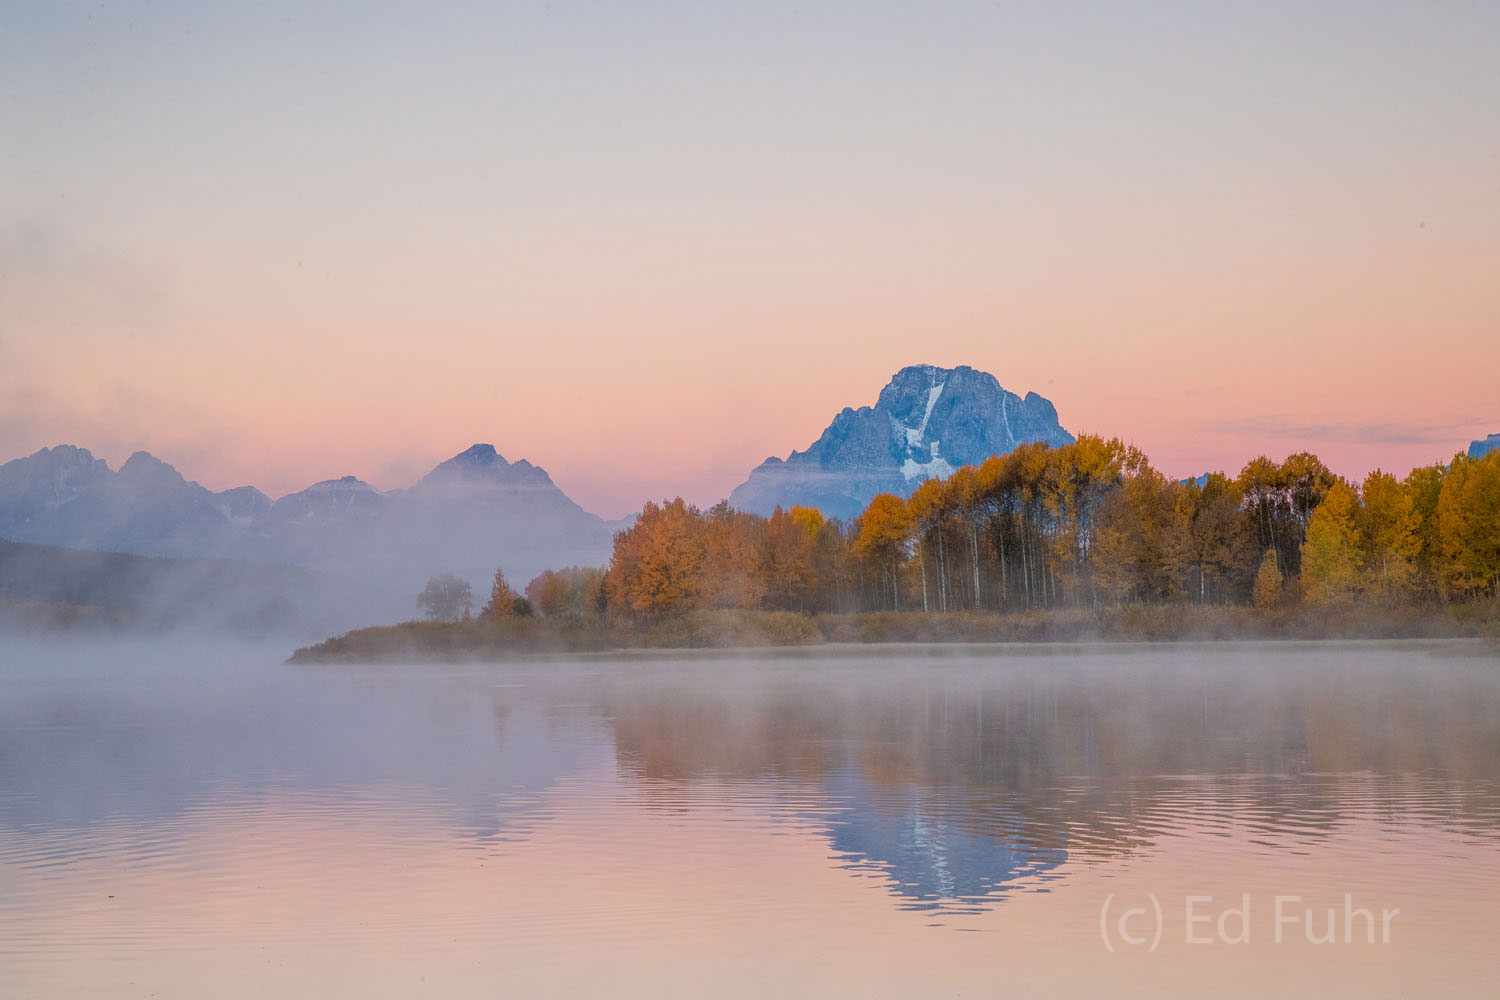 Soft Autumn Morning at Oxbow Bend